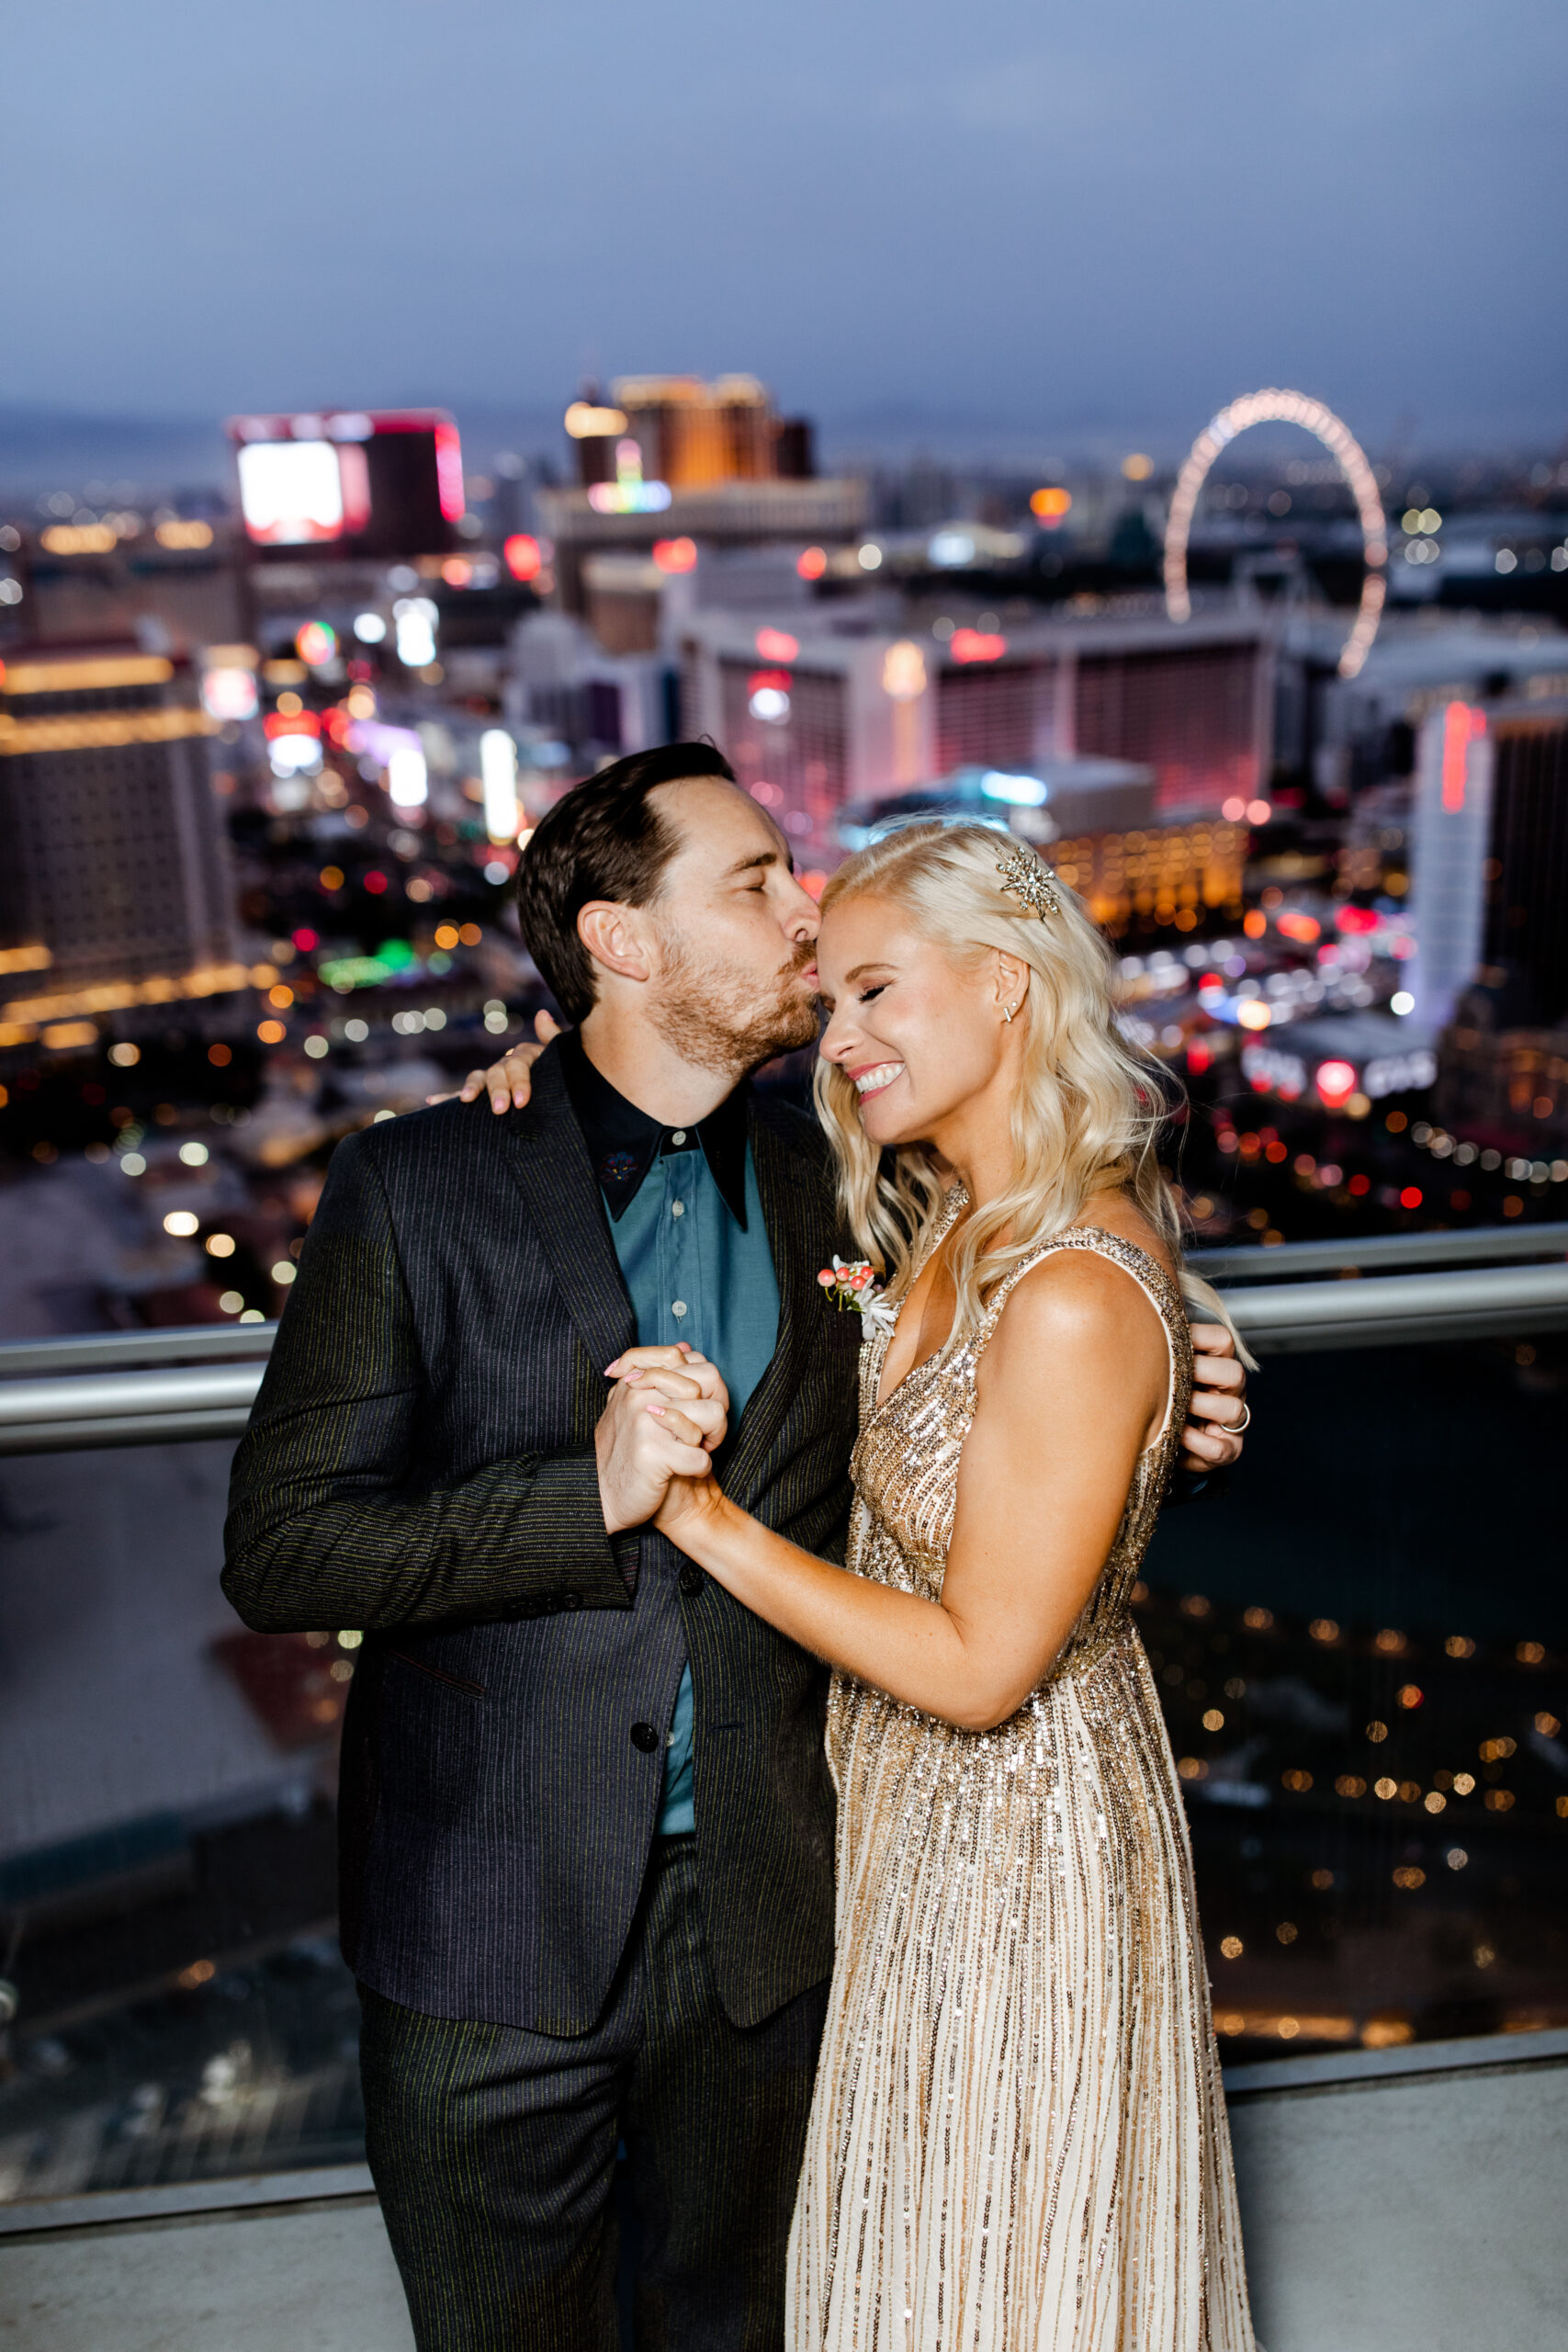 The bride and groom exchange vows during a sunset ceremony on the balcony, with the Las Vegas Strip as a breathtaking backdrop.